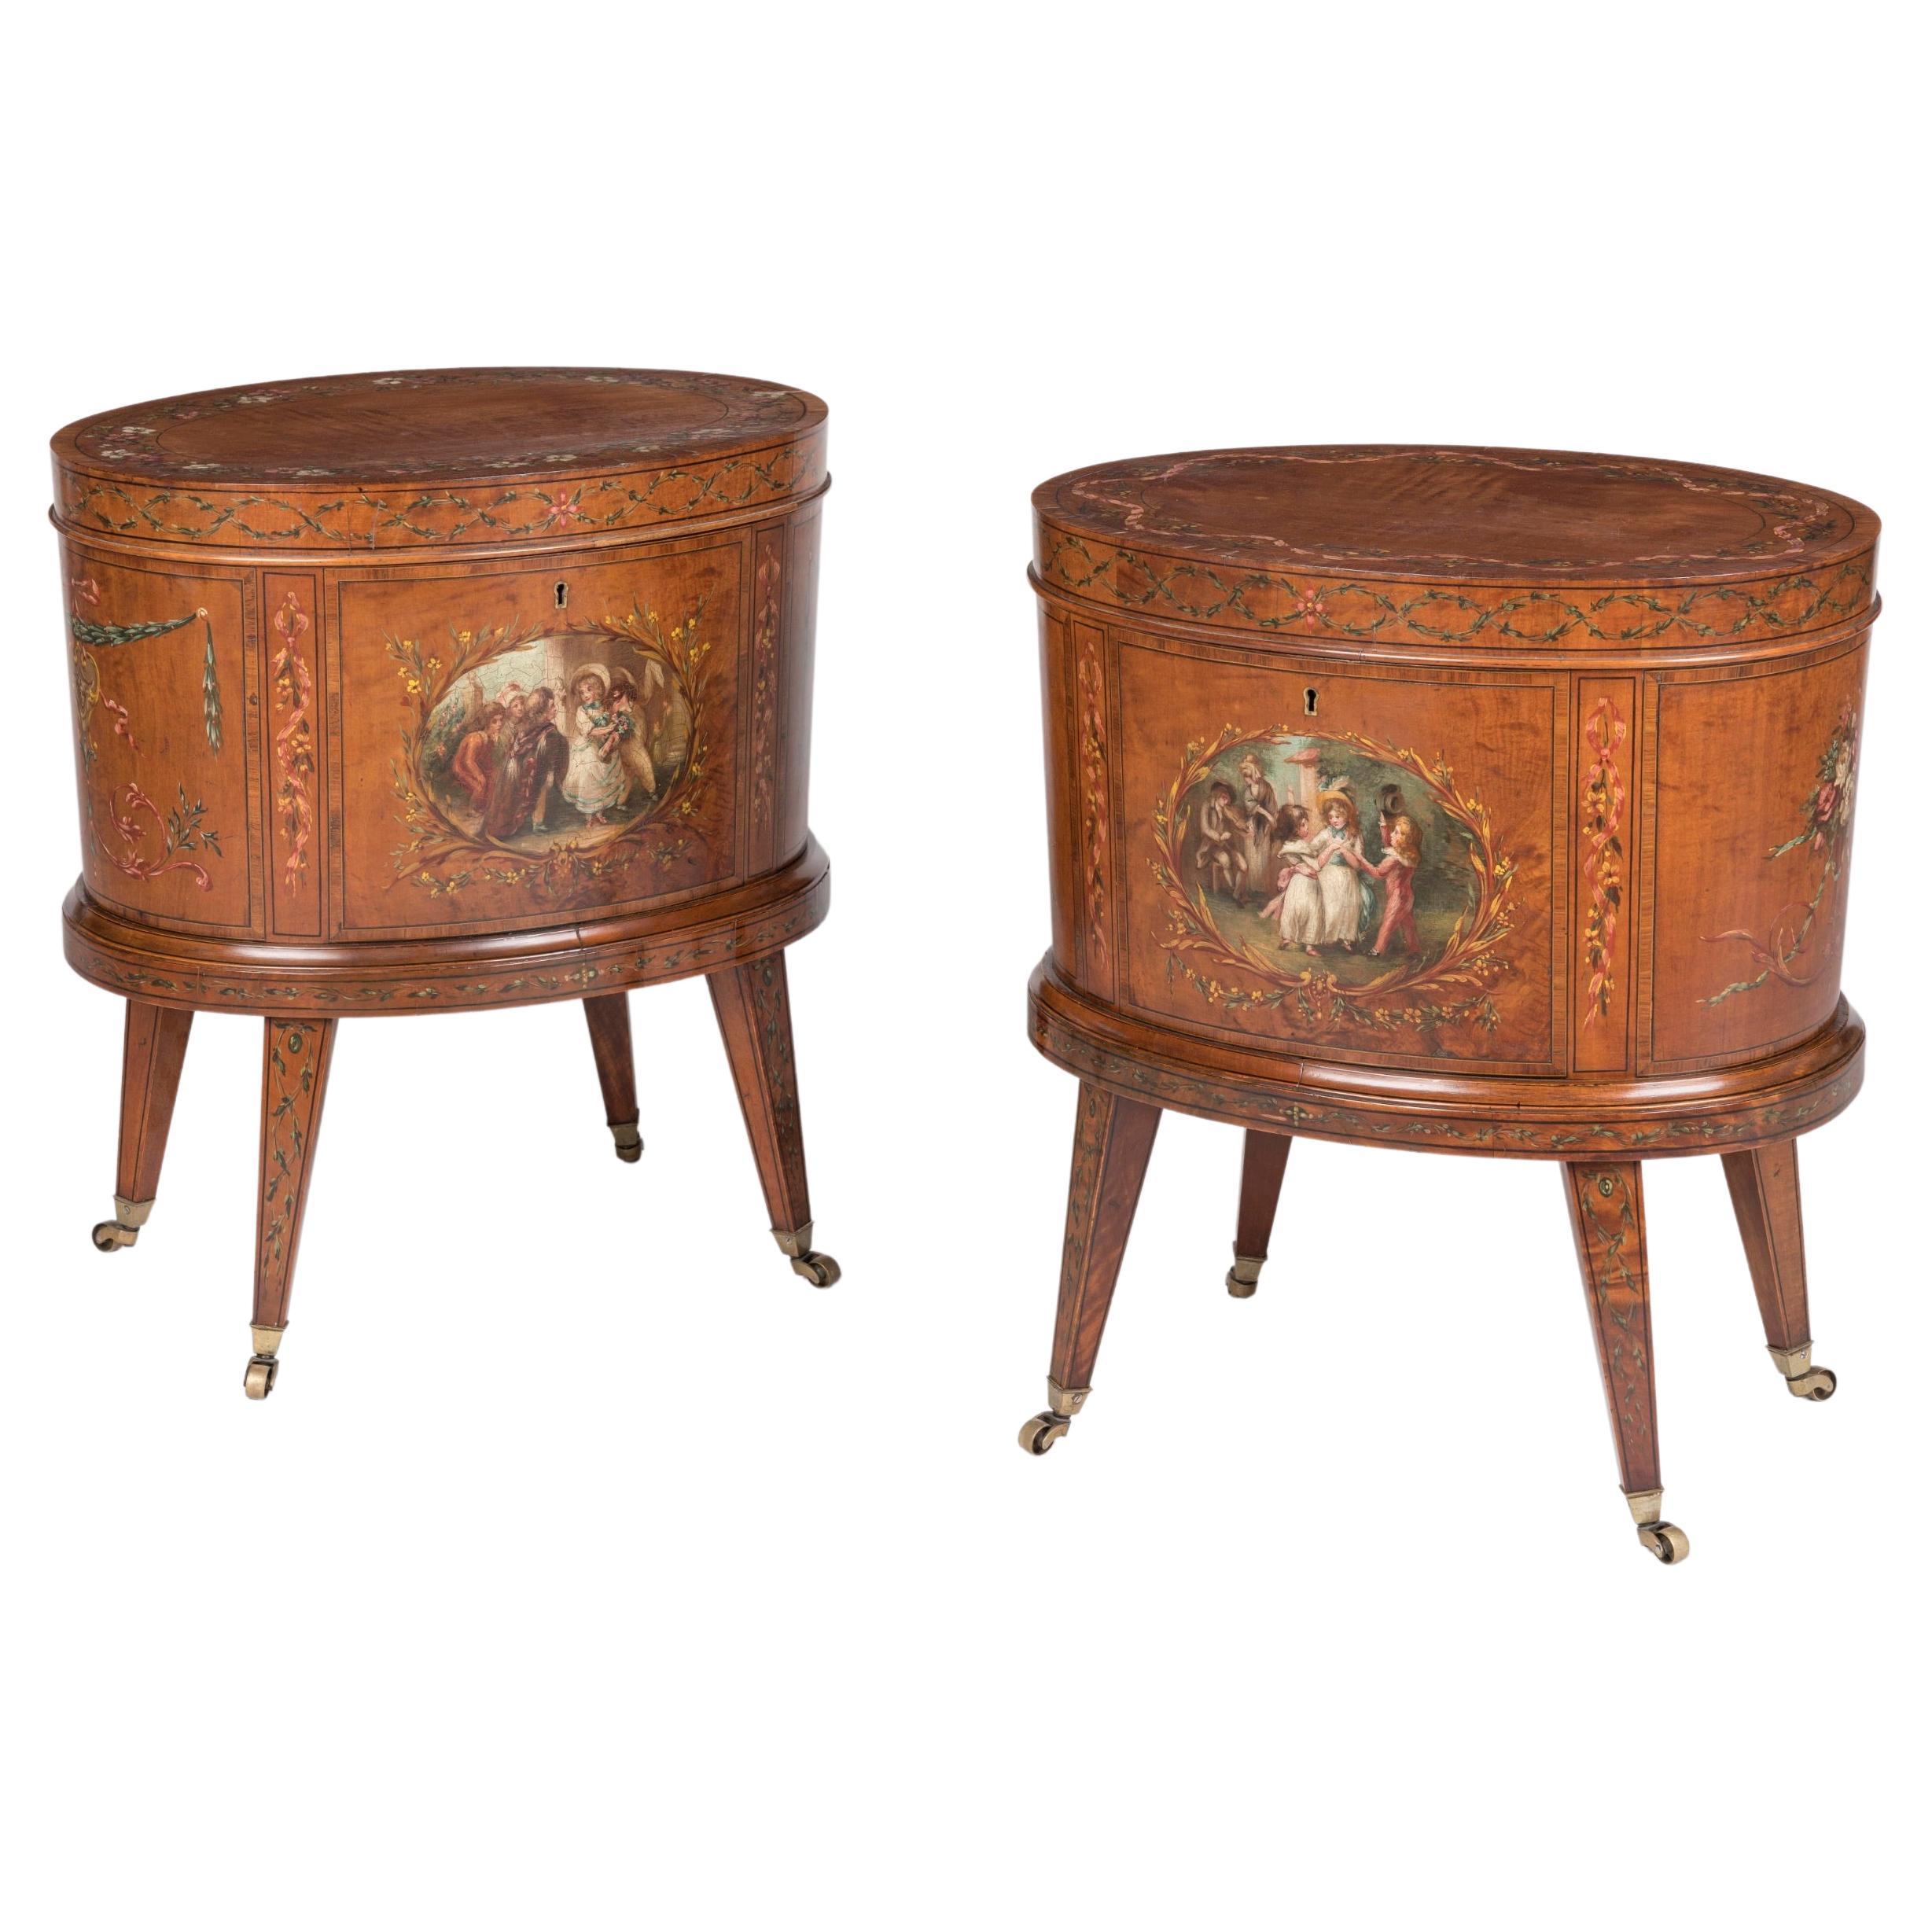 Rare Pair of 19th Century Neoclassical Hand-Painted Satinwood Wine Coolers